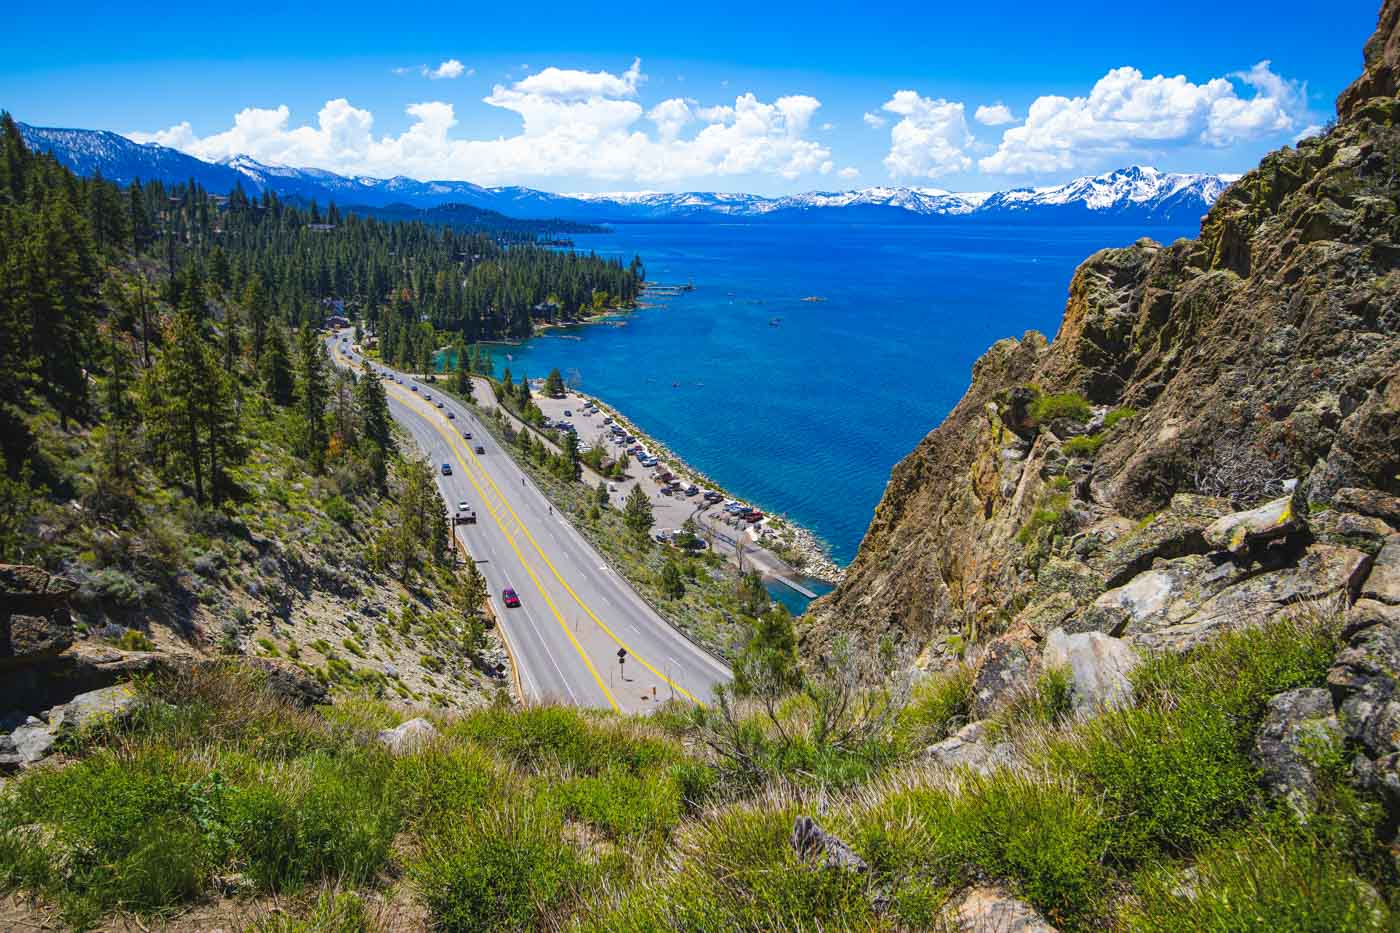 A view from Cave Rock overlooking the highway besides Lake Tahoe and snowy mountains in the distance on a sunny day.